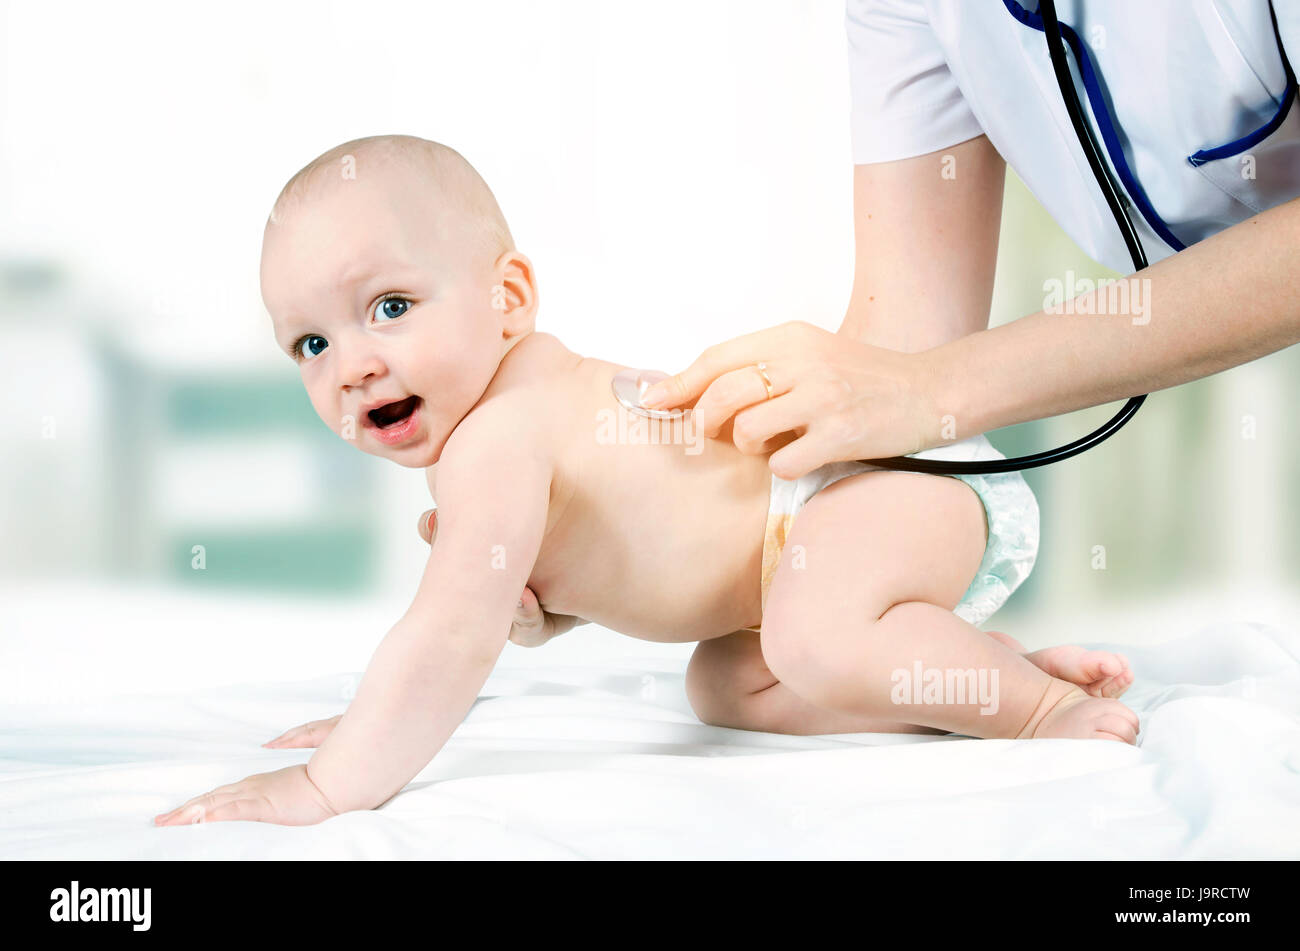 Little child treated by a doctor Stock Photo